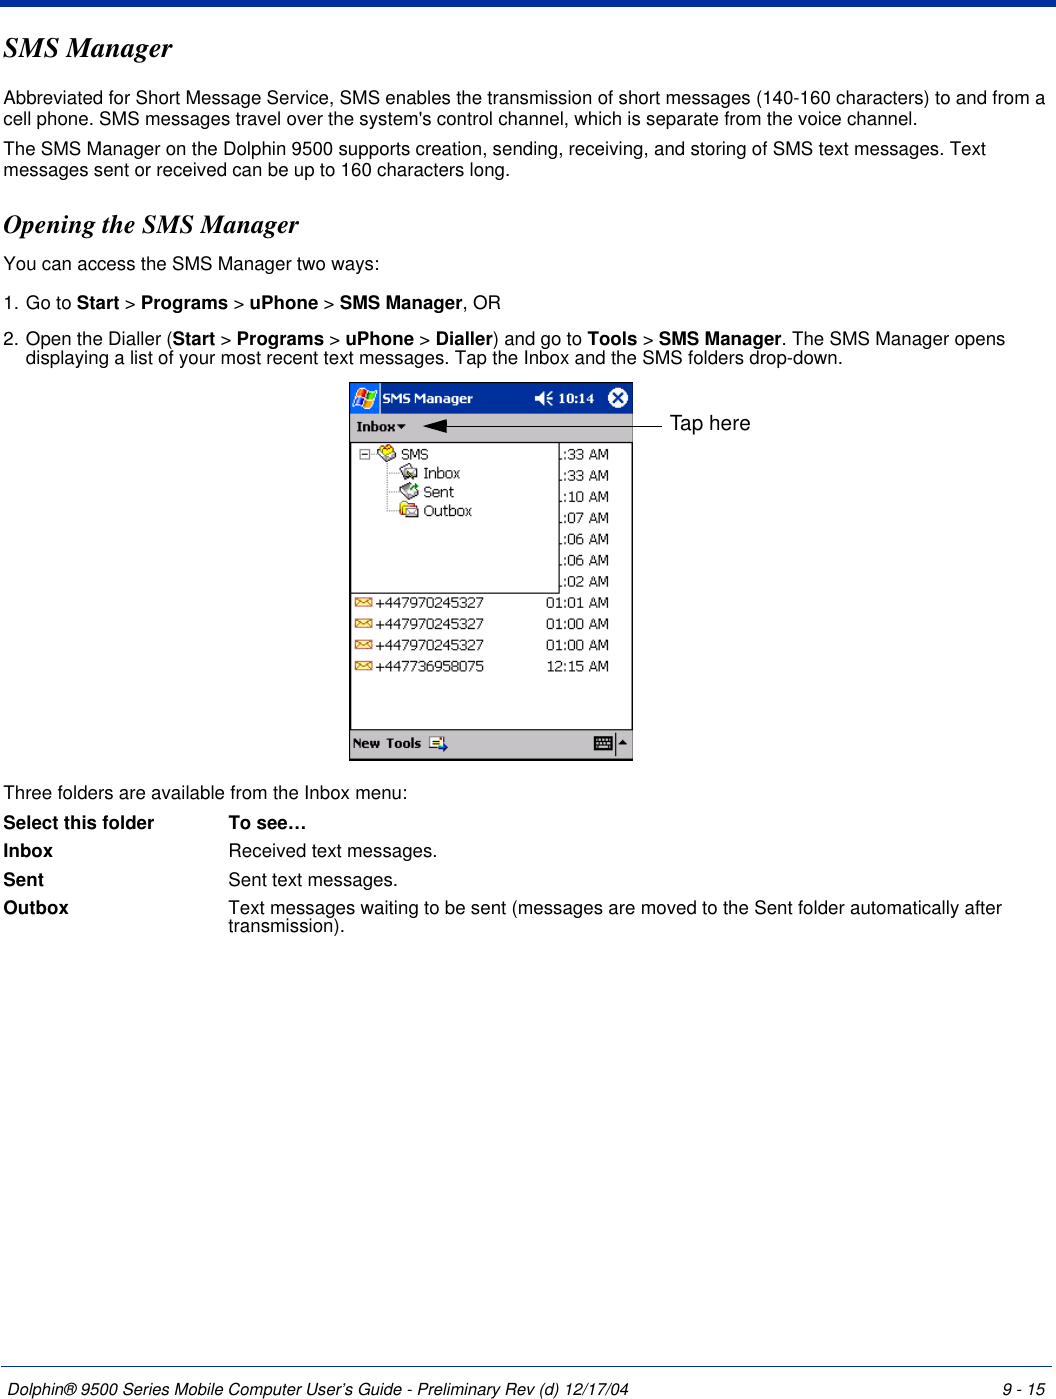 Dolphin® 9500 Series Mobile Computer User’s Guide - Preliminary Rev (d) 12/17/04 9 - 15SMS ManagerAbbreviated for Short Message Service, SMS enables the transmission of short messages (140-160 characters) to and from a cell phone. SMS messages travel over the system&apos;s control channel, which is separate from the voice channel.The SMS Manager on the Dolphin 9500 supports creation, sending, receiving, and storing of SMS text messages. Text messages sent or received can be up to 160 characters long.Opening the SMS ManagerYou can access the SMS Manager two ways:1. Go to Start &gt; Programs &gt; uPhone &gt; SMS Manager, OR2. Open the Dialler (Start &gt; Programs &gt; uPhone &gt; Dialler) and go to Tools &gt; SMS Manager. The SMS Manager opens displaying a list of your most recent text messages. Tap the Inbox and the SMS folders drop-down. Three folders are available from the Inbox menu:Select this folder To see…Inbox Received text messages.Sent  Sent text messages.Outbox  Text messages waiting to be sent (messages are moved to the Sent folder automatically after transmission).Tap here